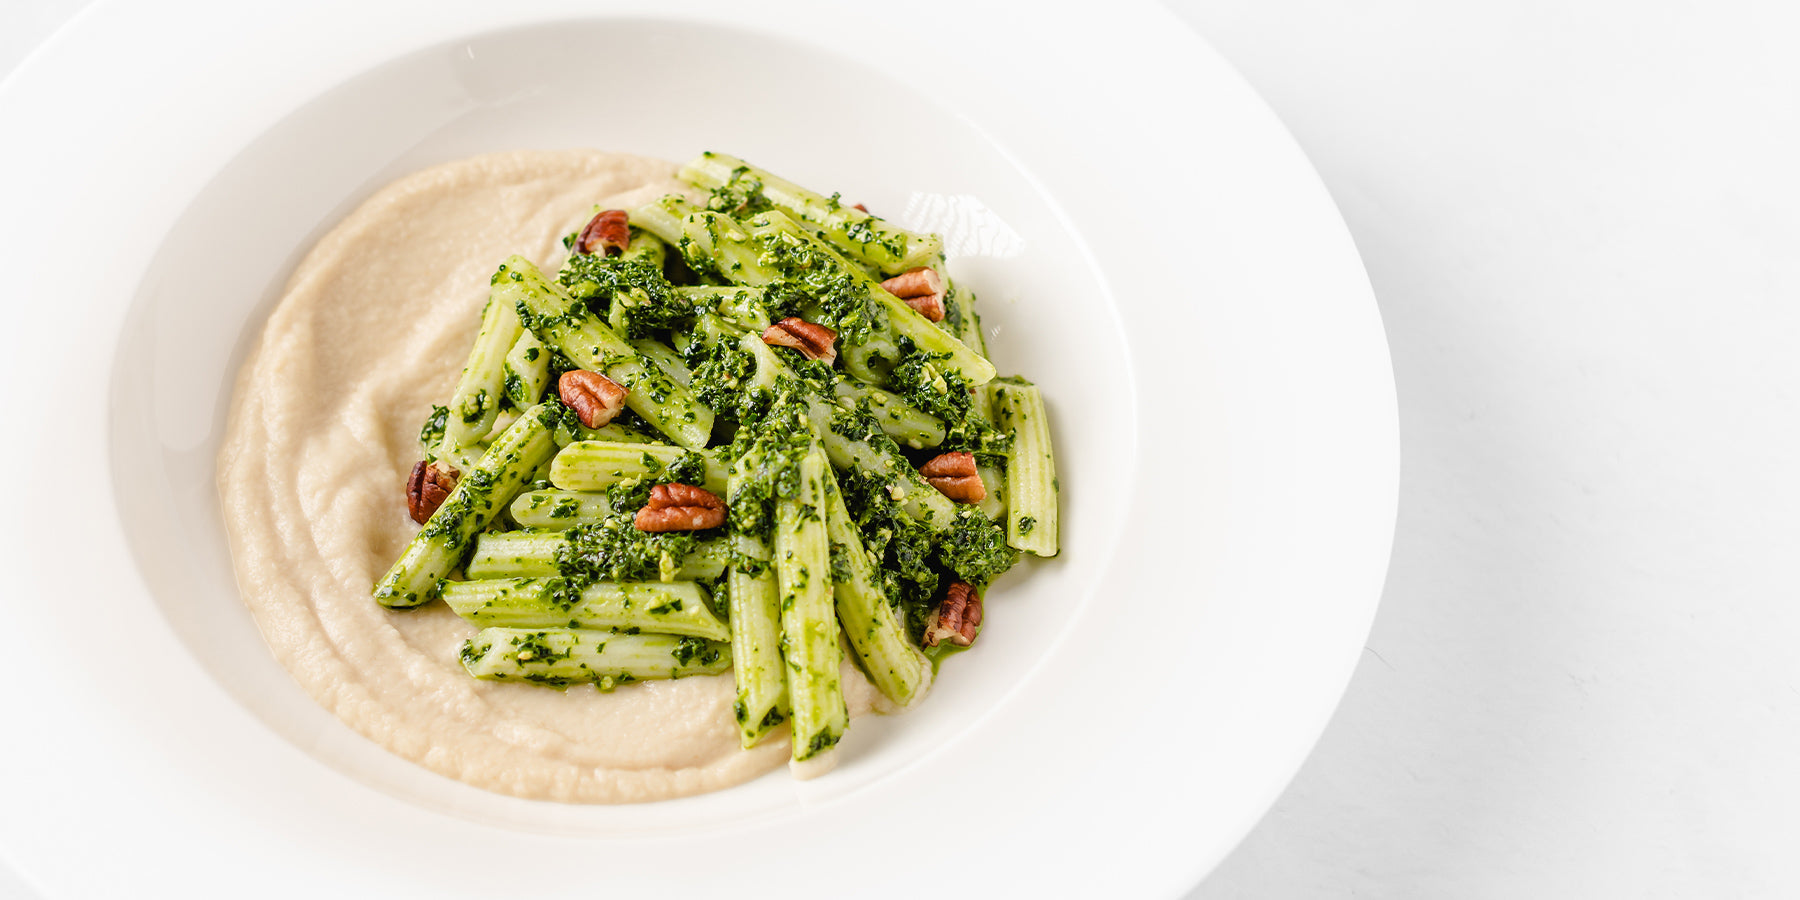 Plate of White Corn Pennette Rigate with Celery Root Cream, Tuscan (Black) Kale Pesto and Rosemary Scented Pecans